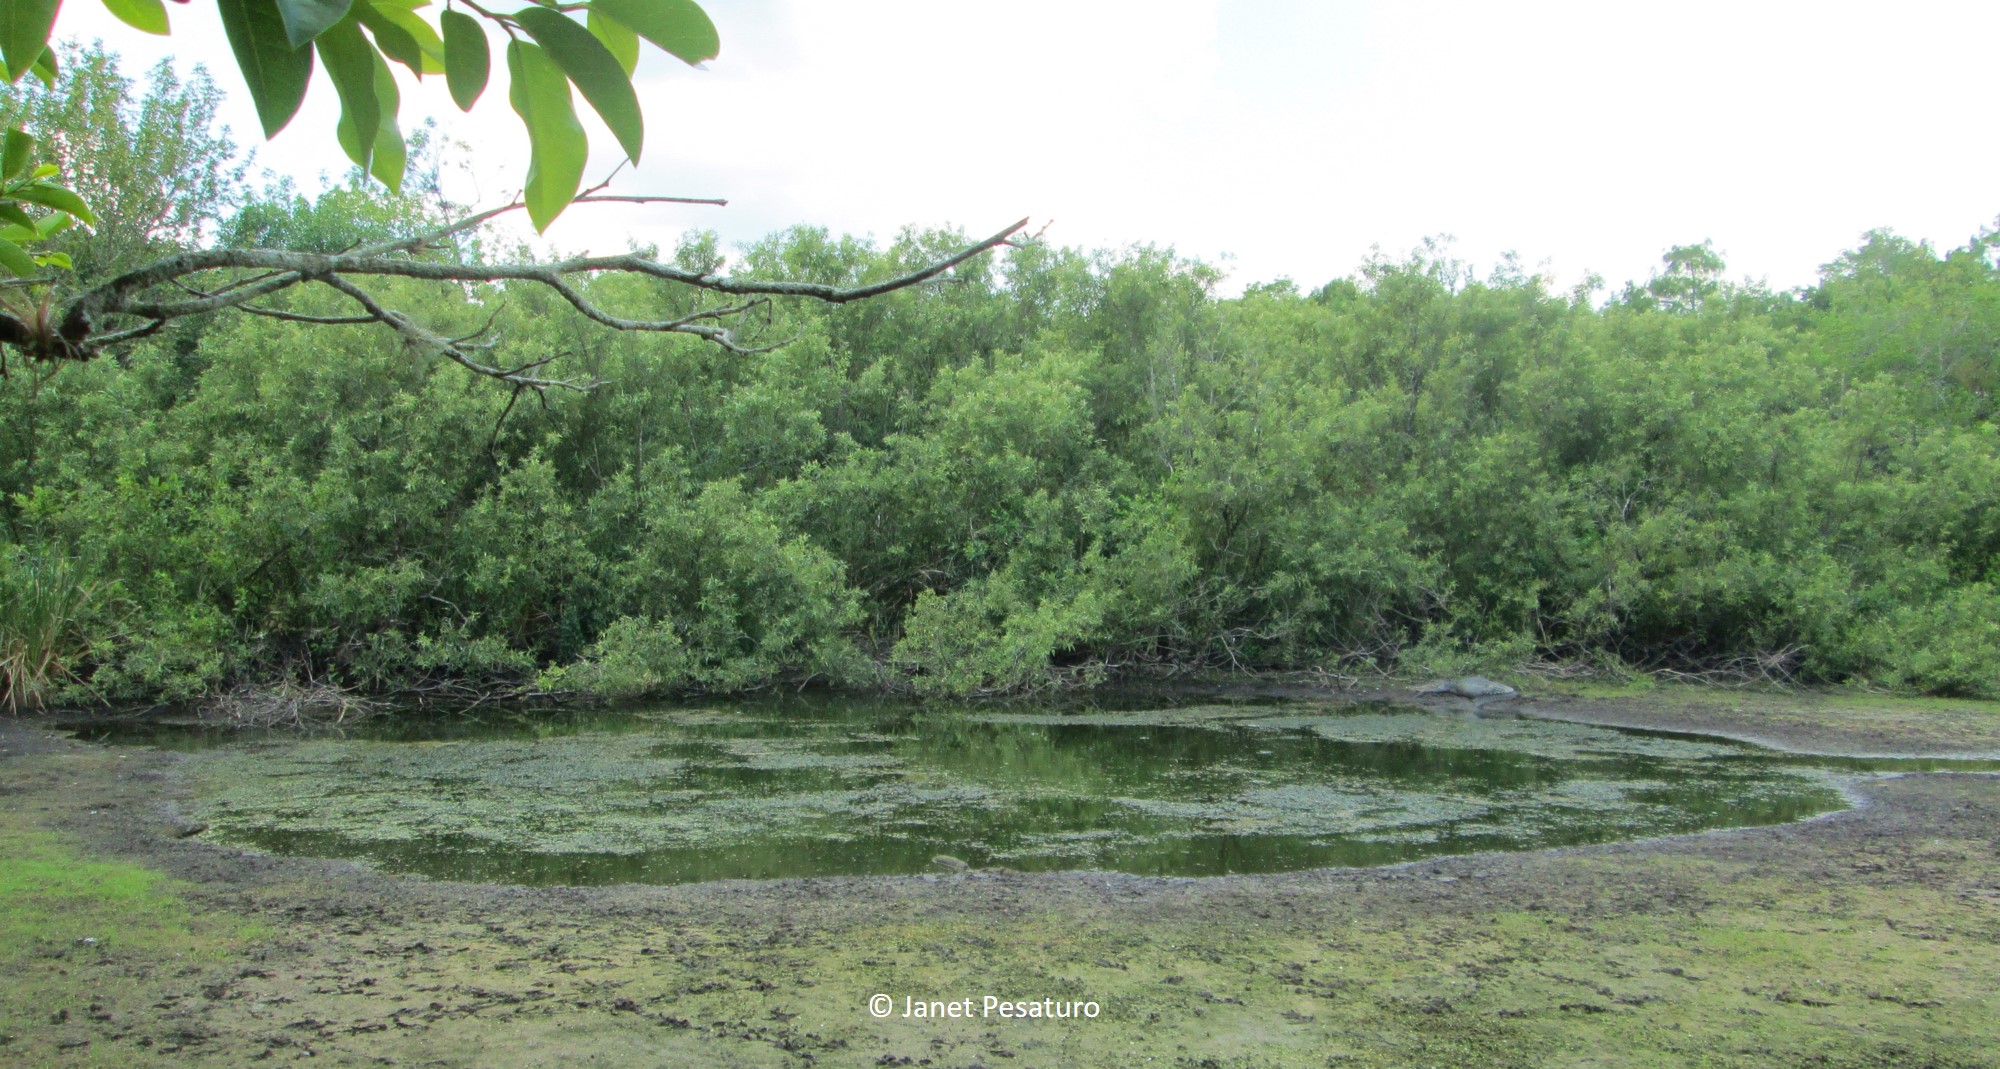 A large gator hole with a mound of sticks at the far left, which could be an alligator nest